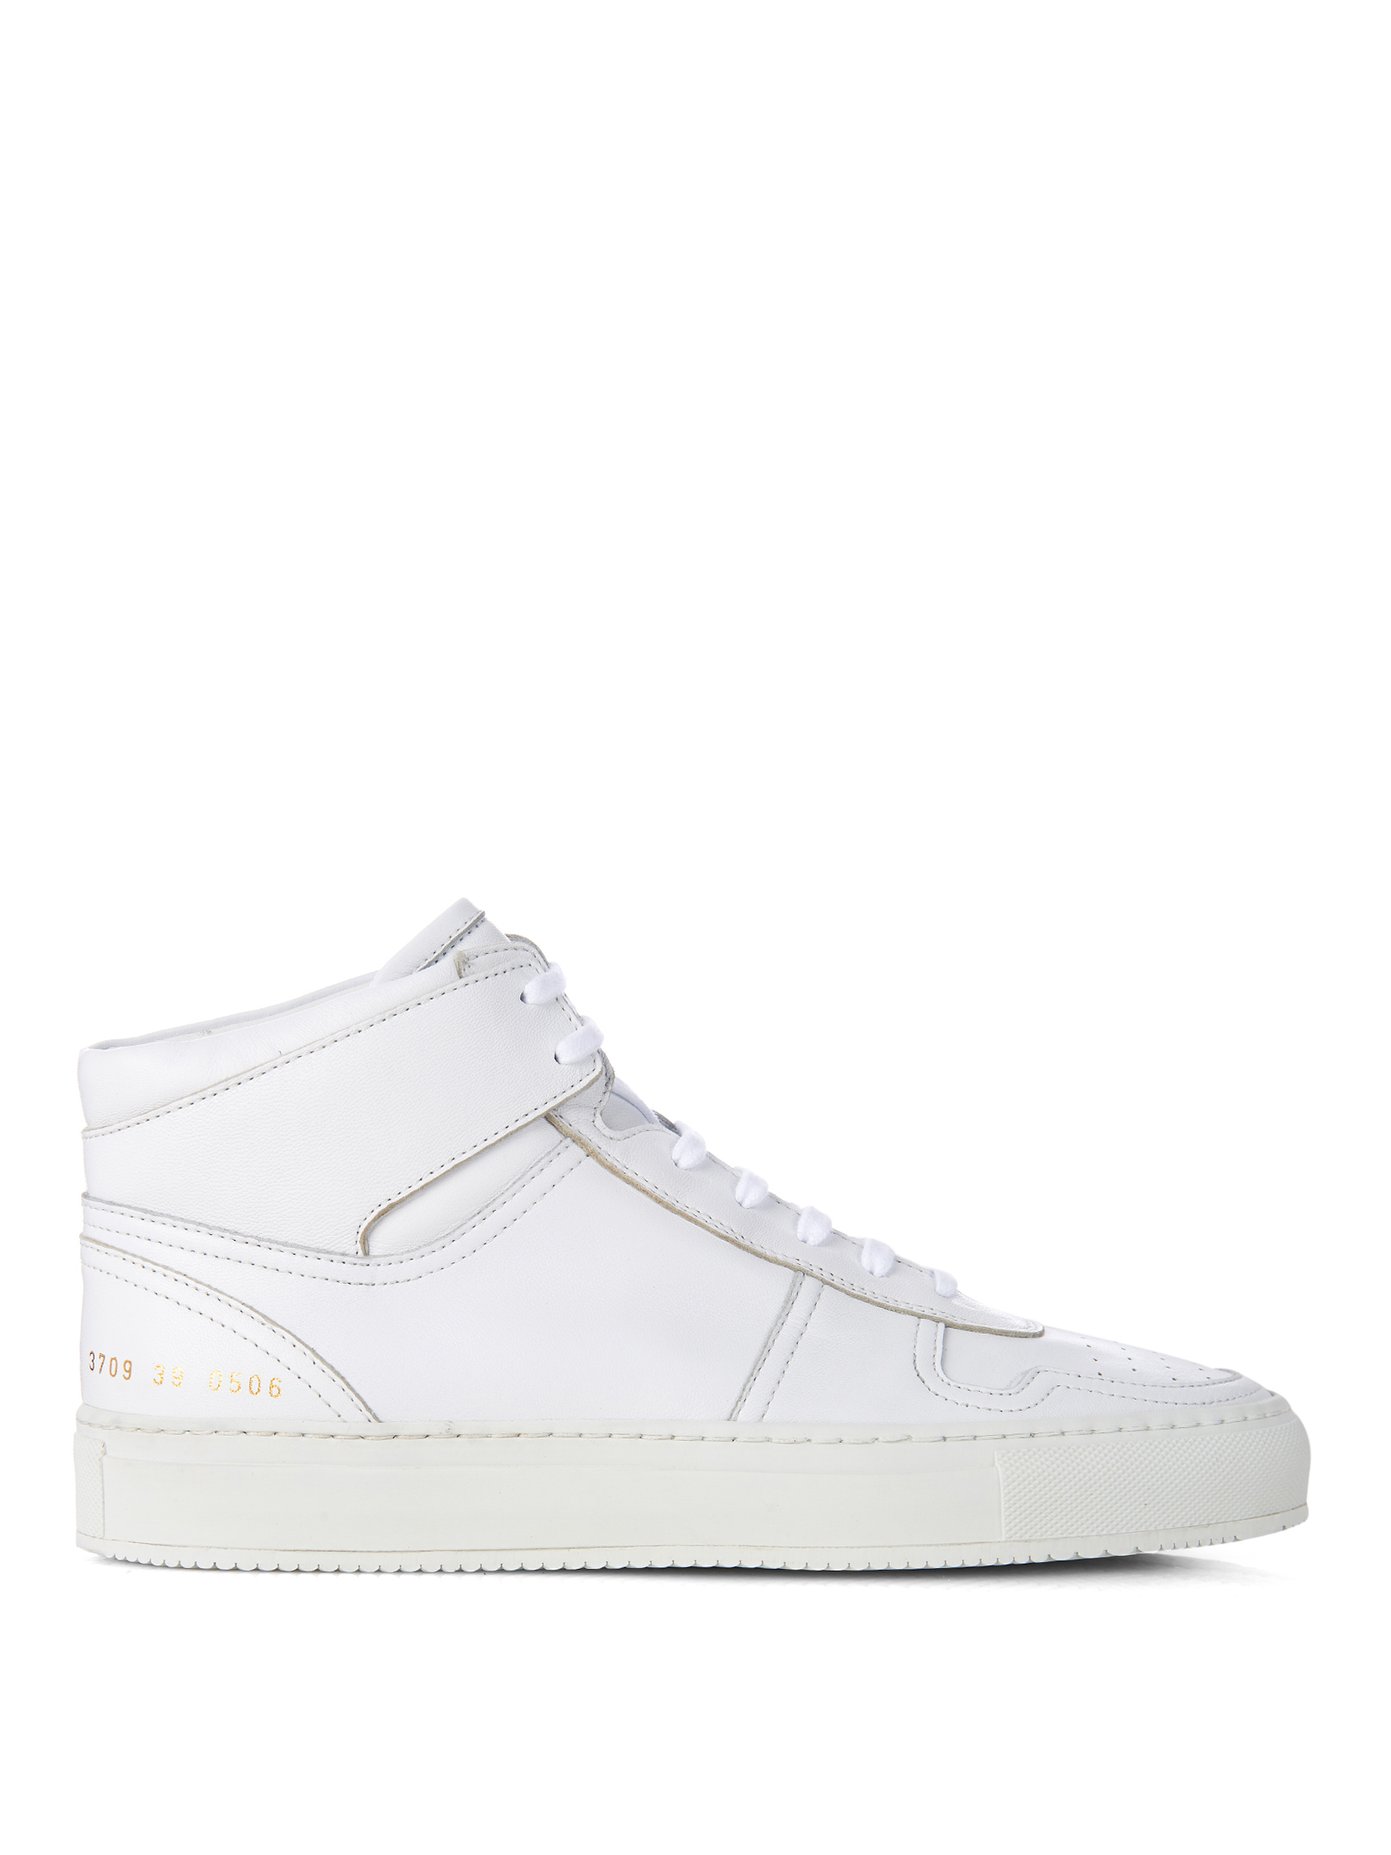 Bball leather high-top trainers 